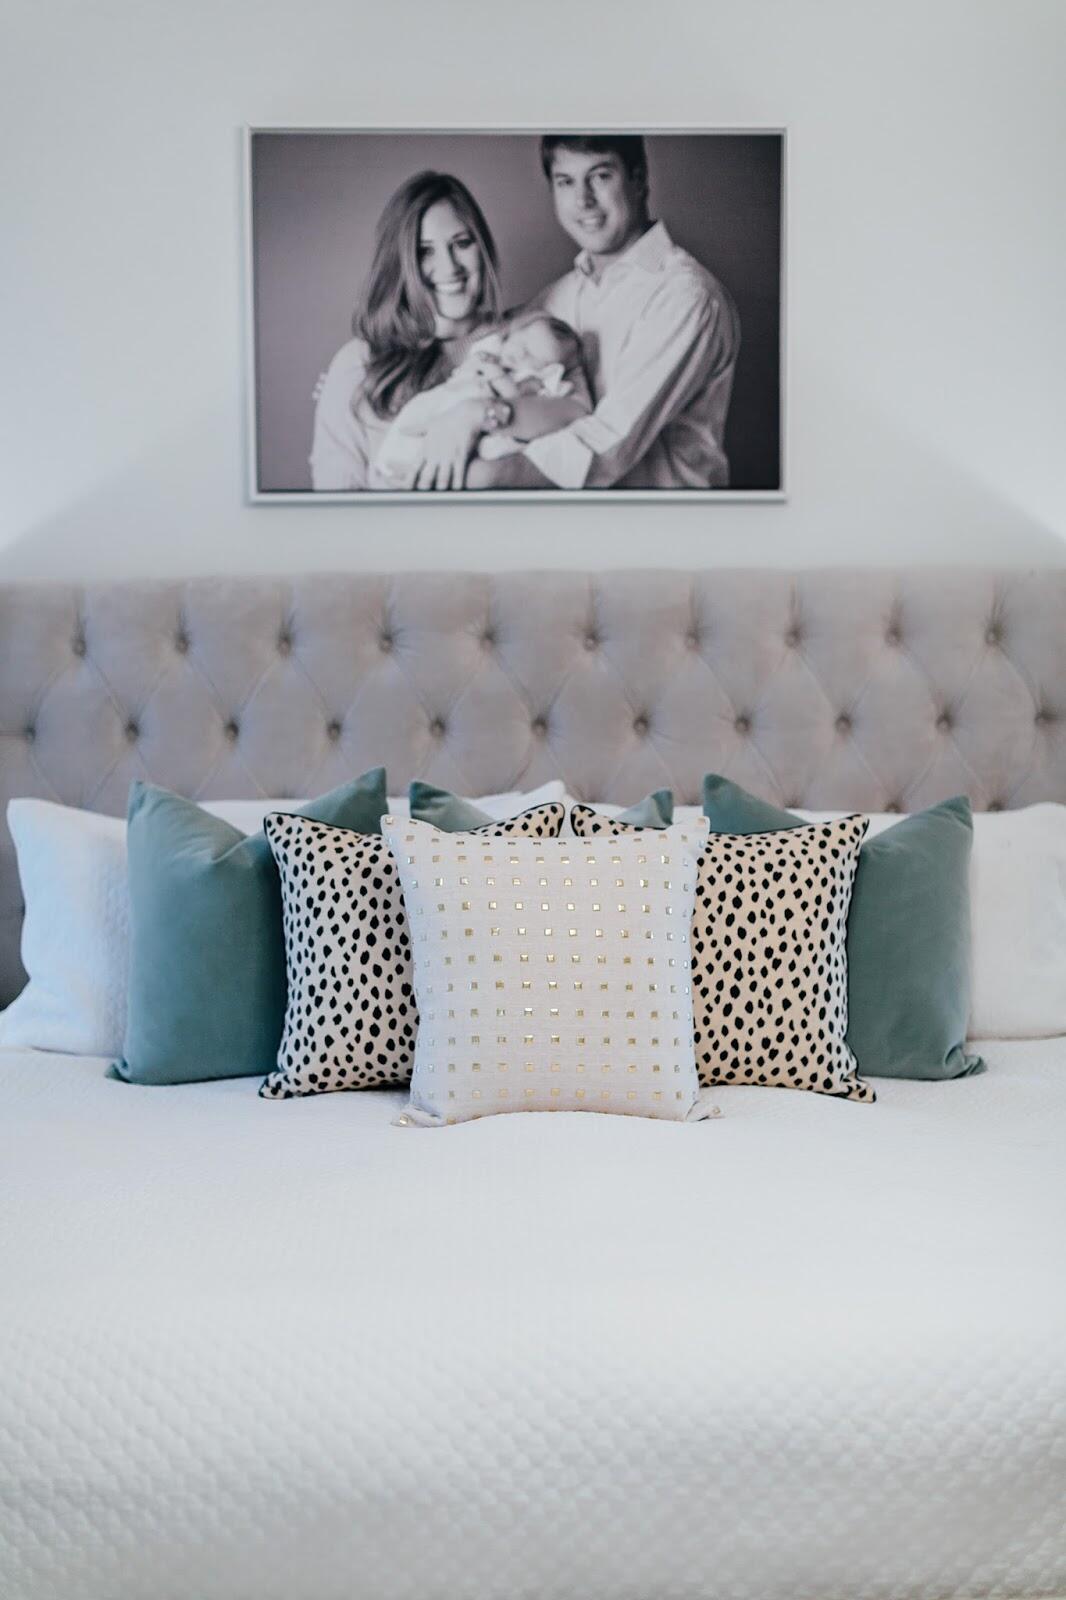 Bedroom Makeover: How to Update Your Bedroom for a Summer Refresh by popular blogger Walking in Memphis in High Heels